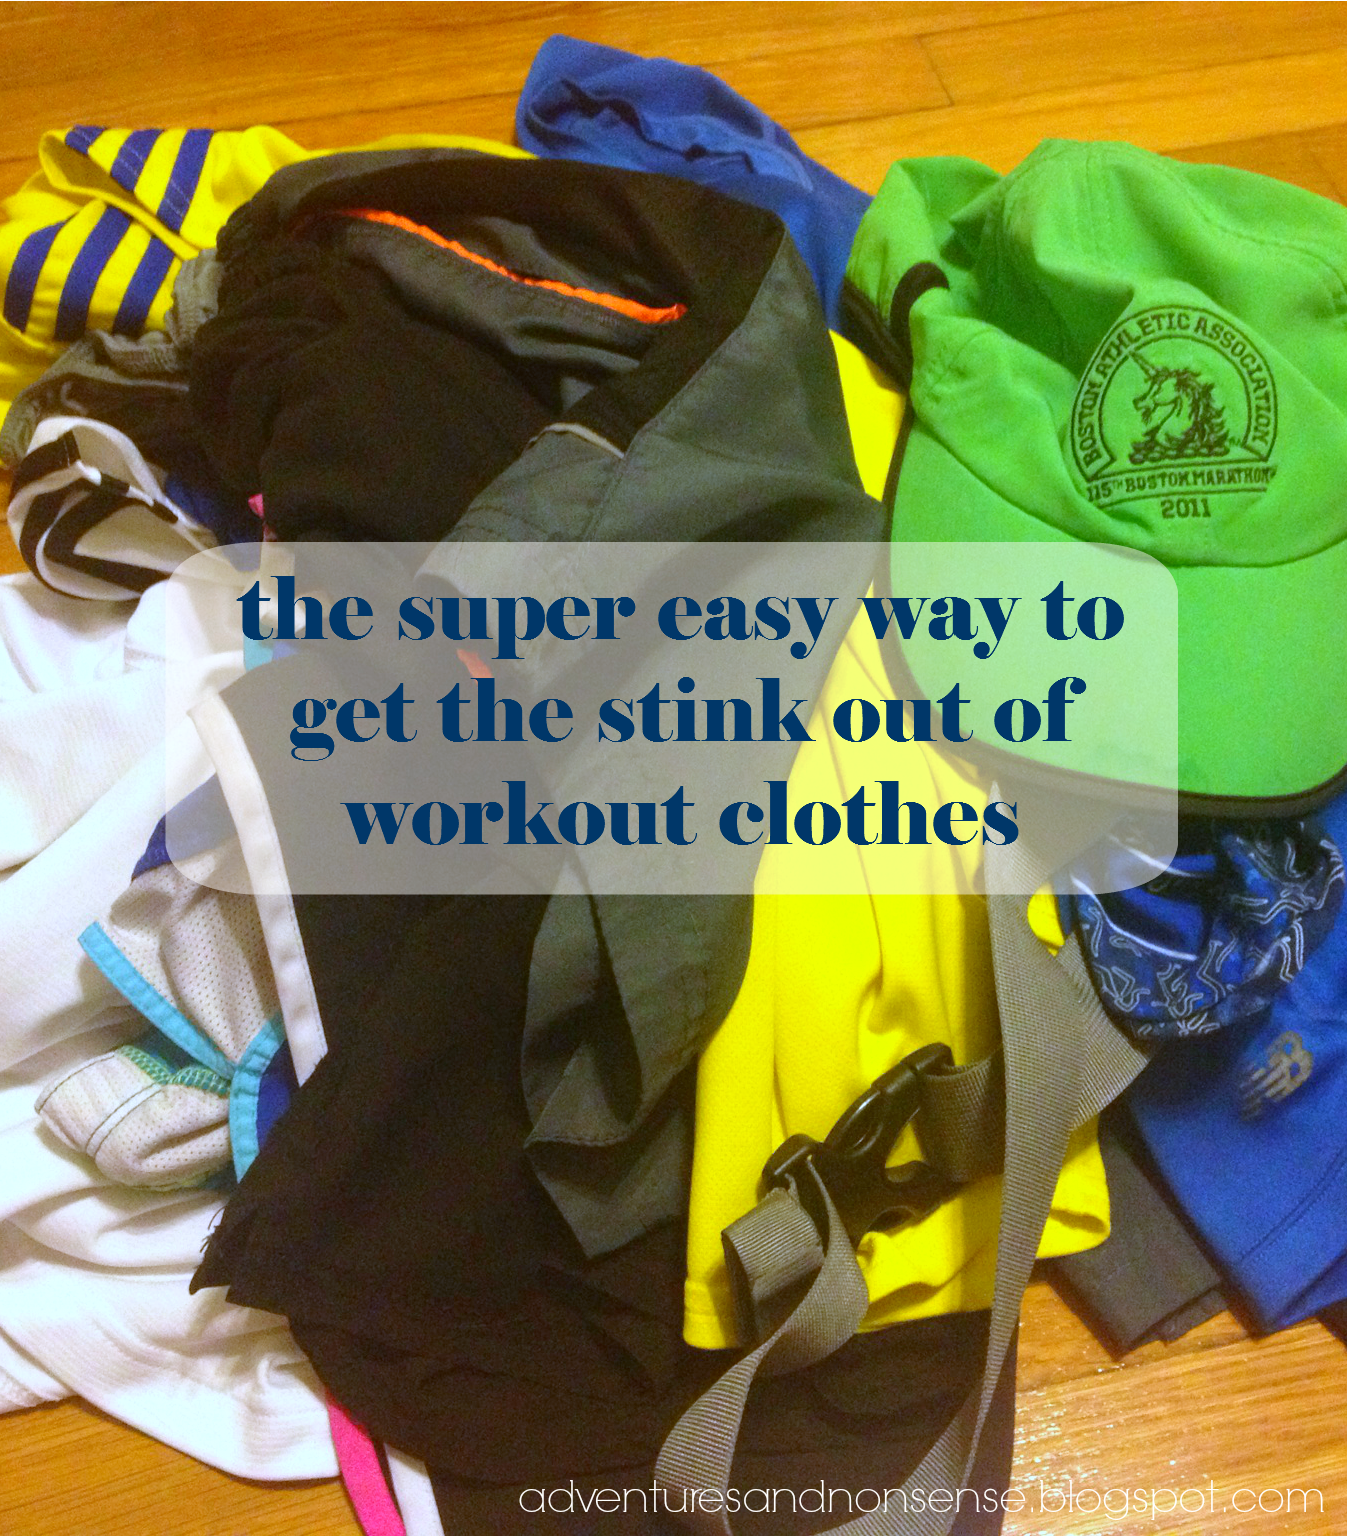 adventures and nonsense: how to get the stink out of your work out clothes